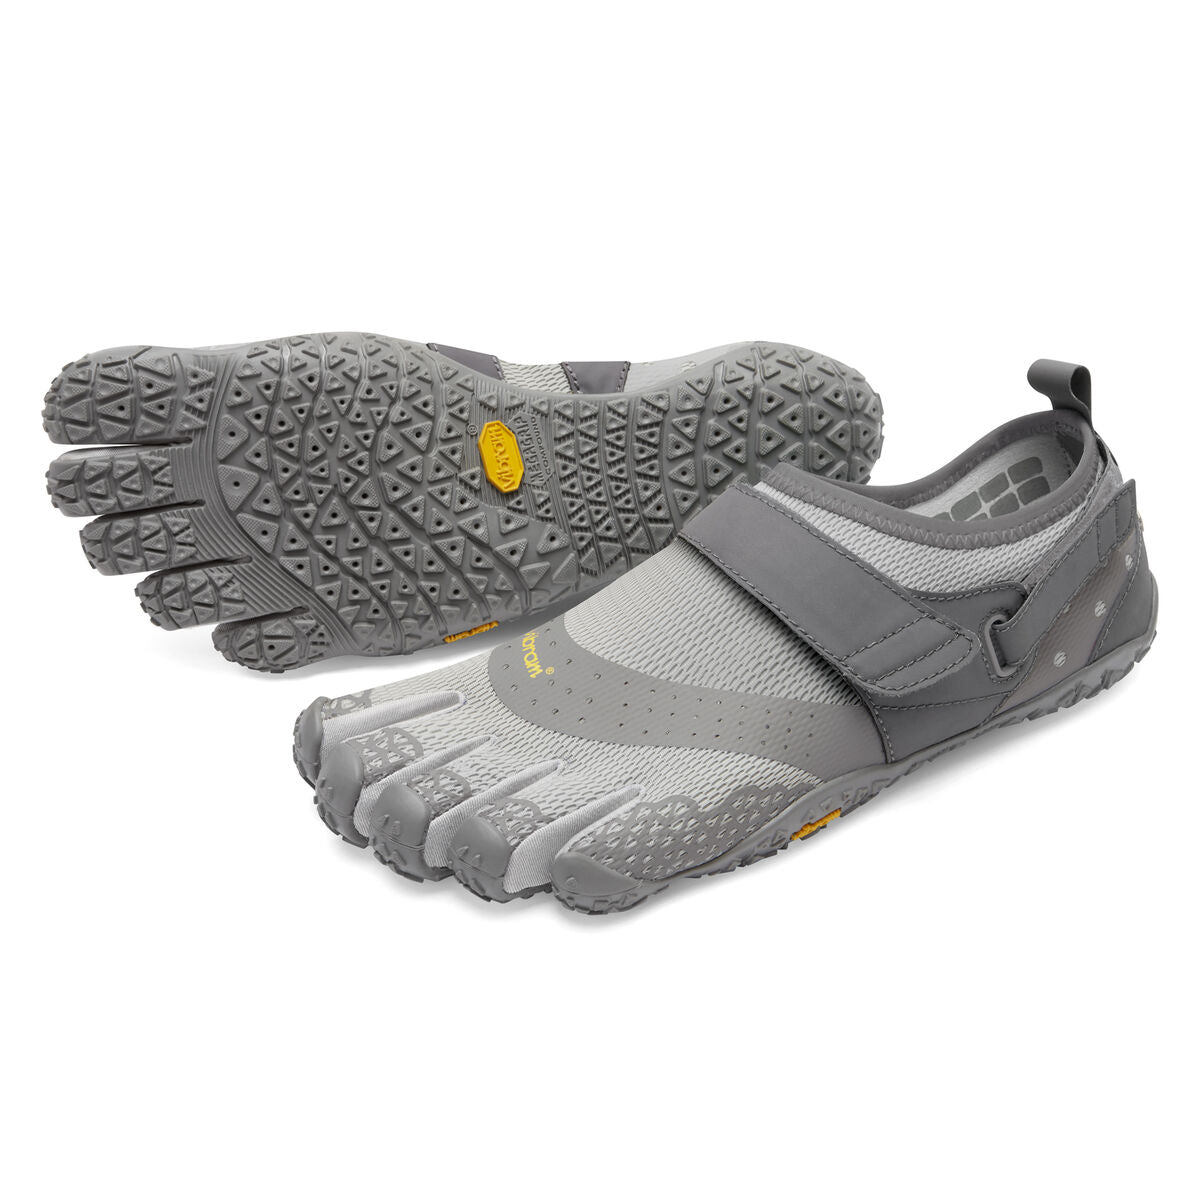 Men's Vibram Five Fingers V-Aqua Water Shoe in Grey from the front